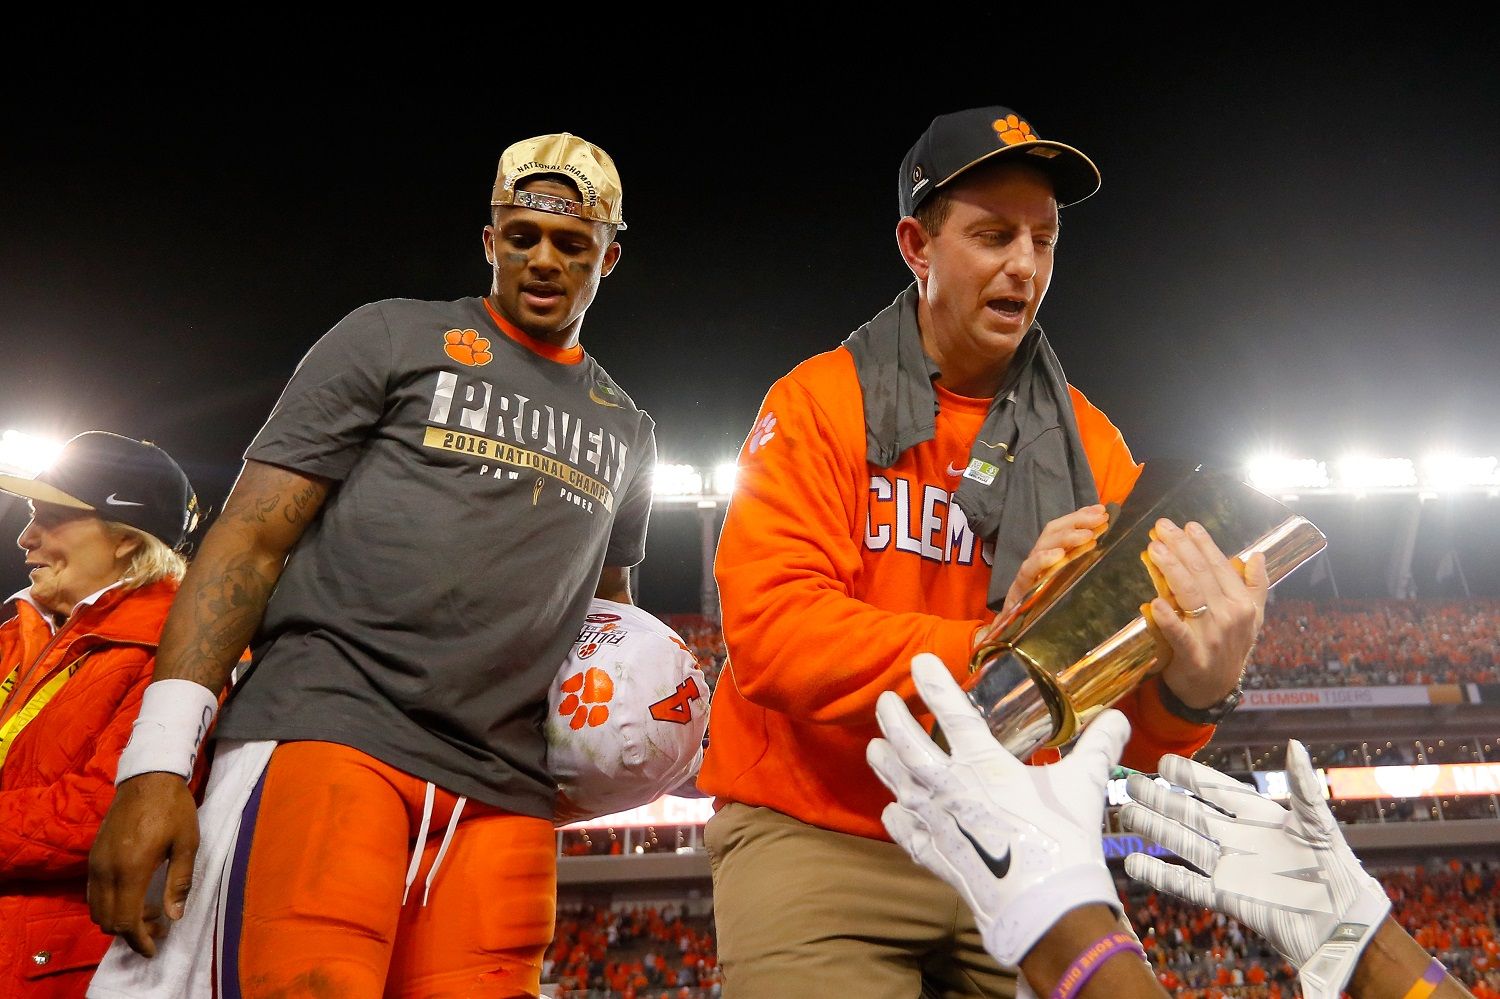 TAMPA, FL - JANUARY 09:  Quarterback Deshaun Watson #4 and head coach Dabo Swinney of the Clemson Tigers celebrate with the College Football Playoff National Championship Trophy after defeating the Alabama Crimson Tide 35-31 to win the 2017 College Football Playoff National Championship Game at Raymond James Stadium on January 9, 2017 in Tampa, Florida.  (Photo by Kevin C. Cox/Getty Images)